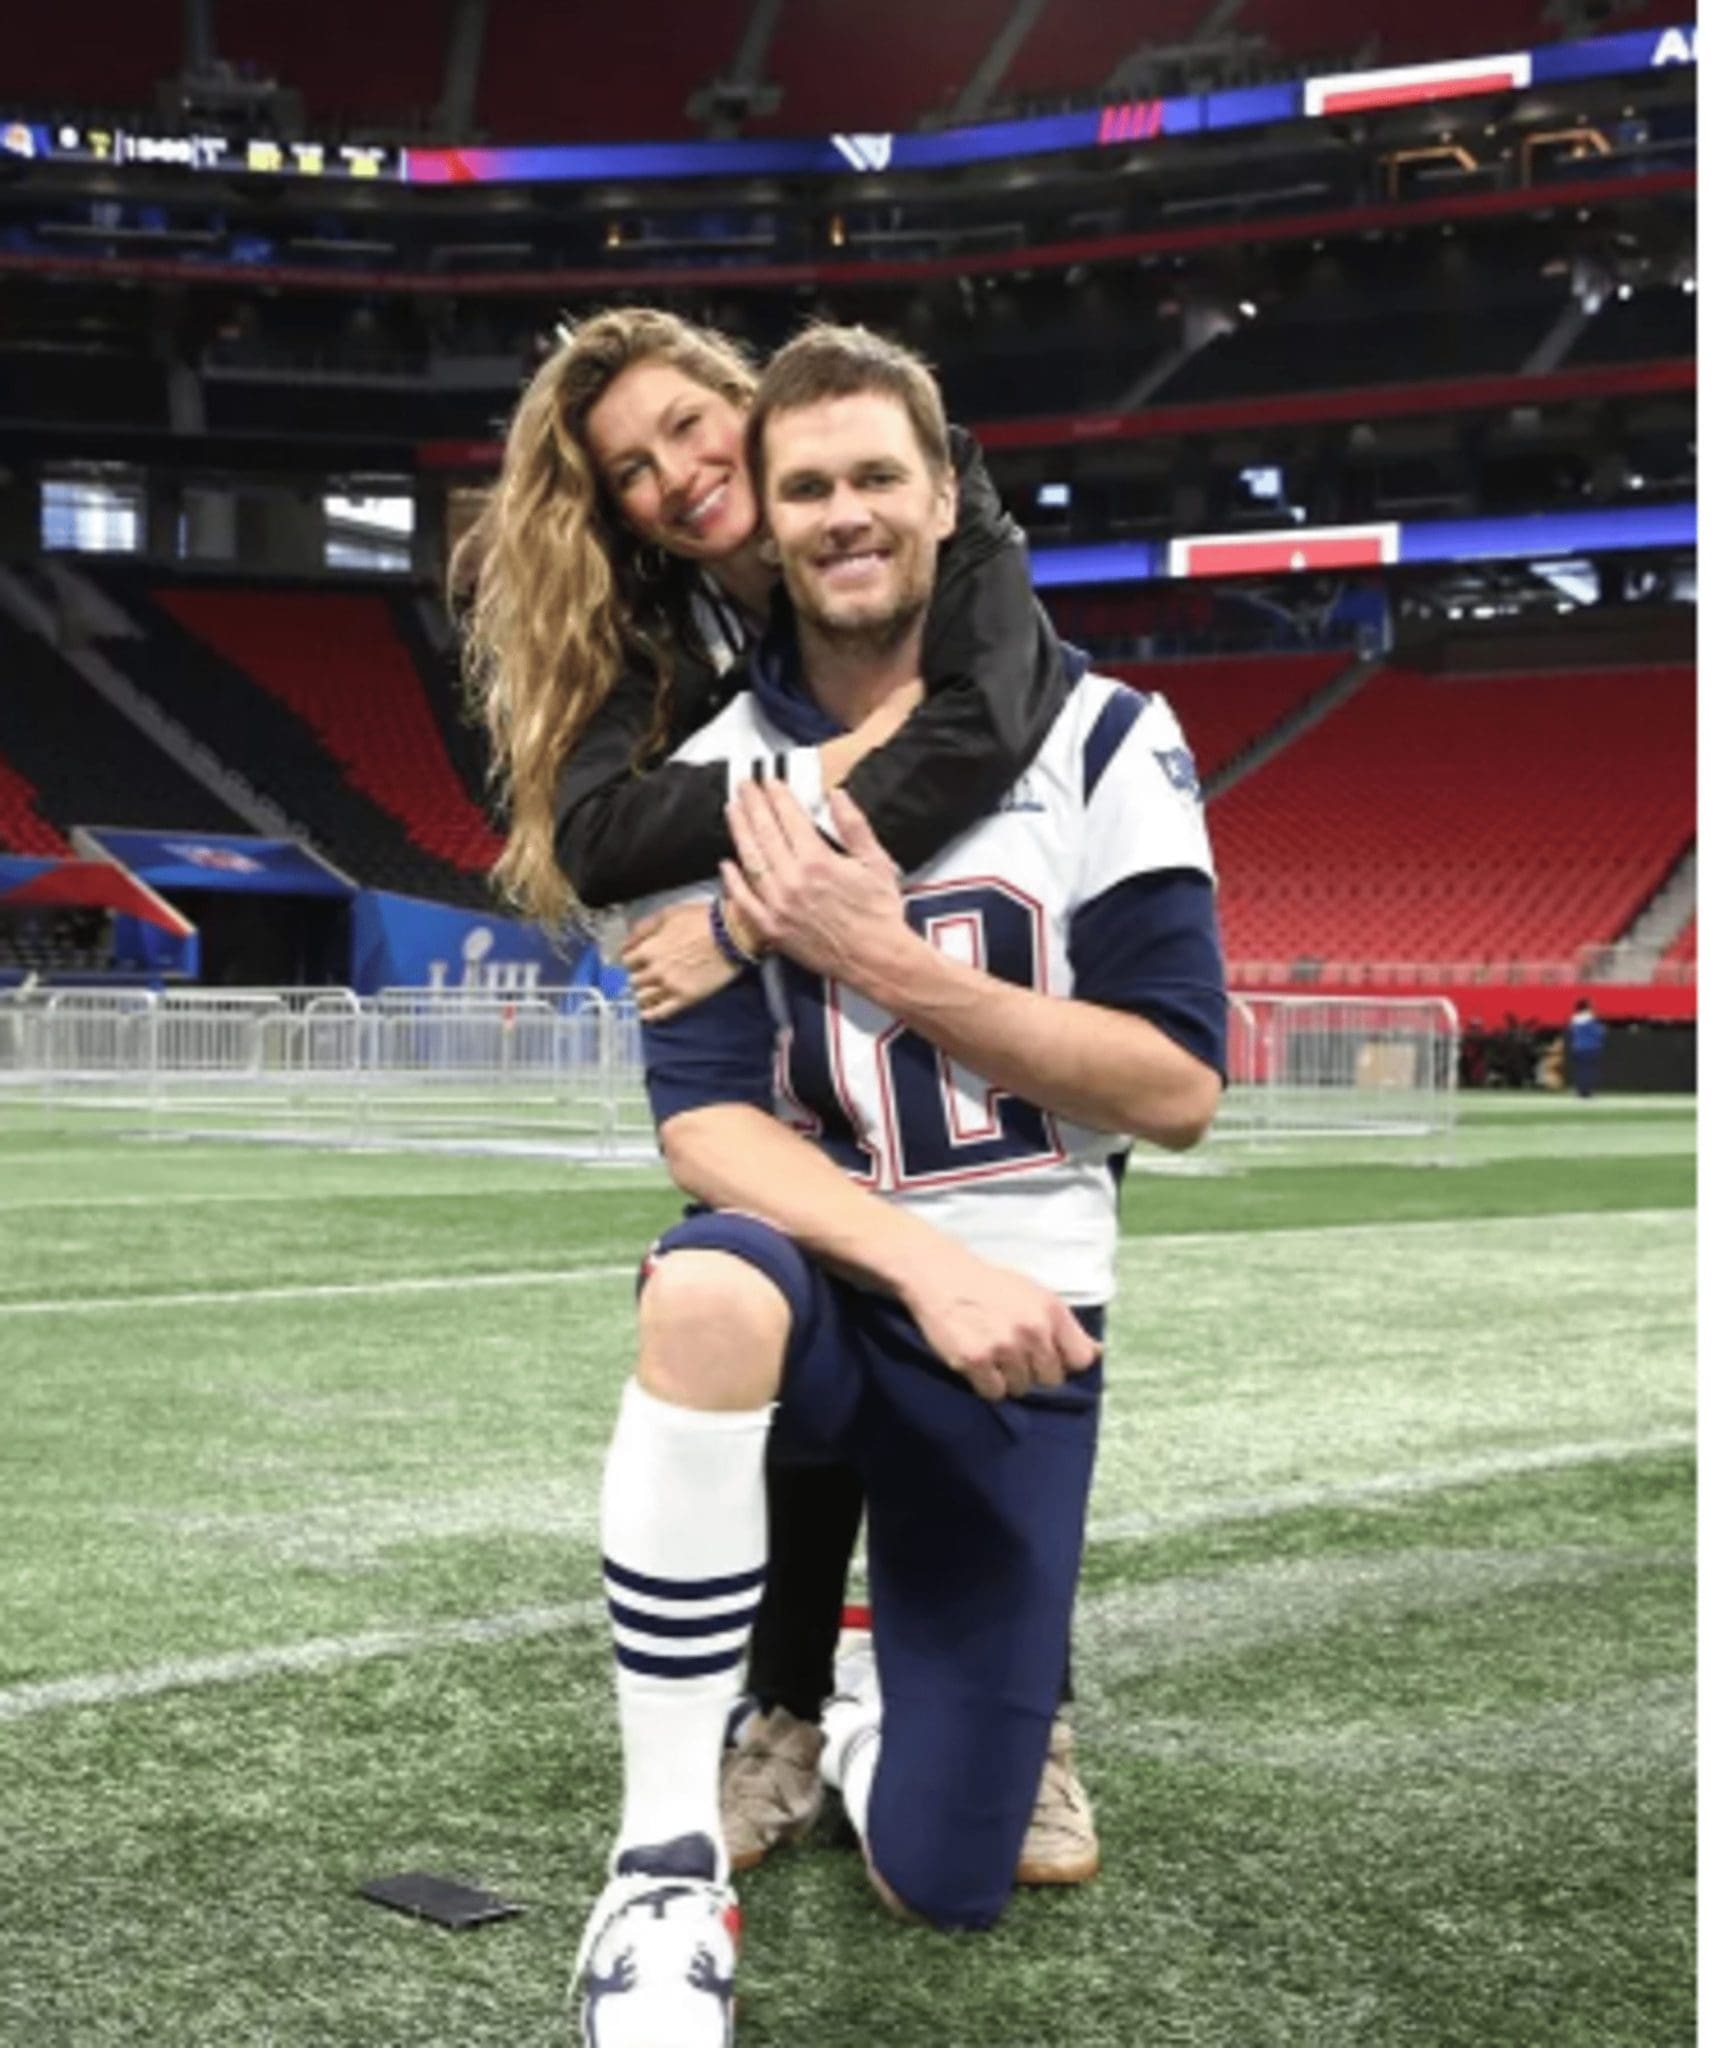 In Support Of Her Husband Tom Brady, Gisele Bündchen Posts On Twitter